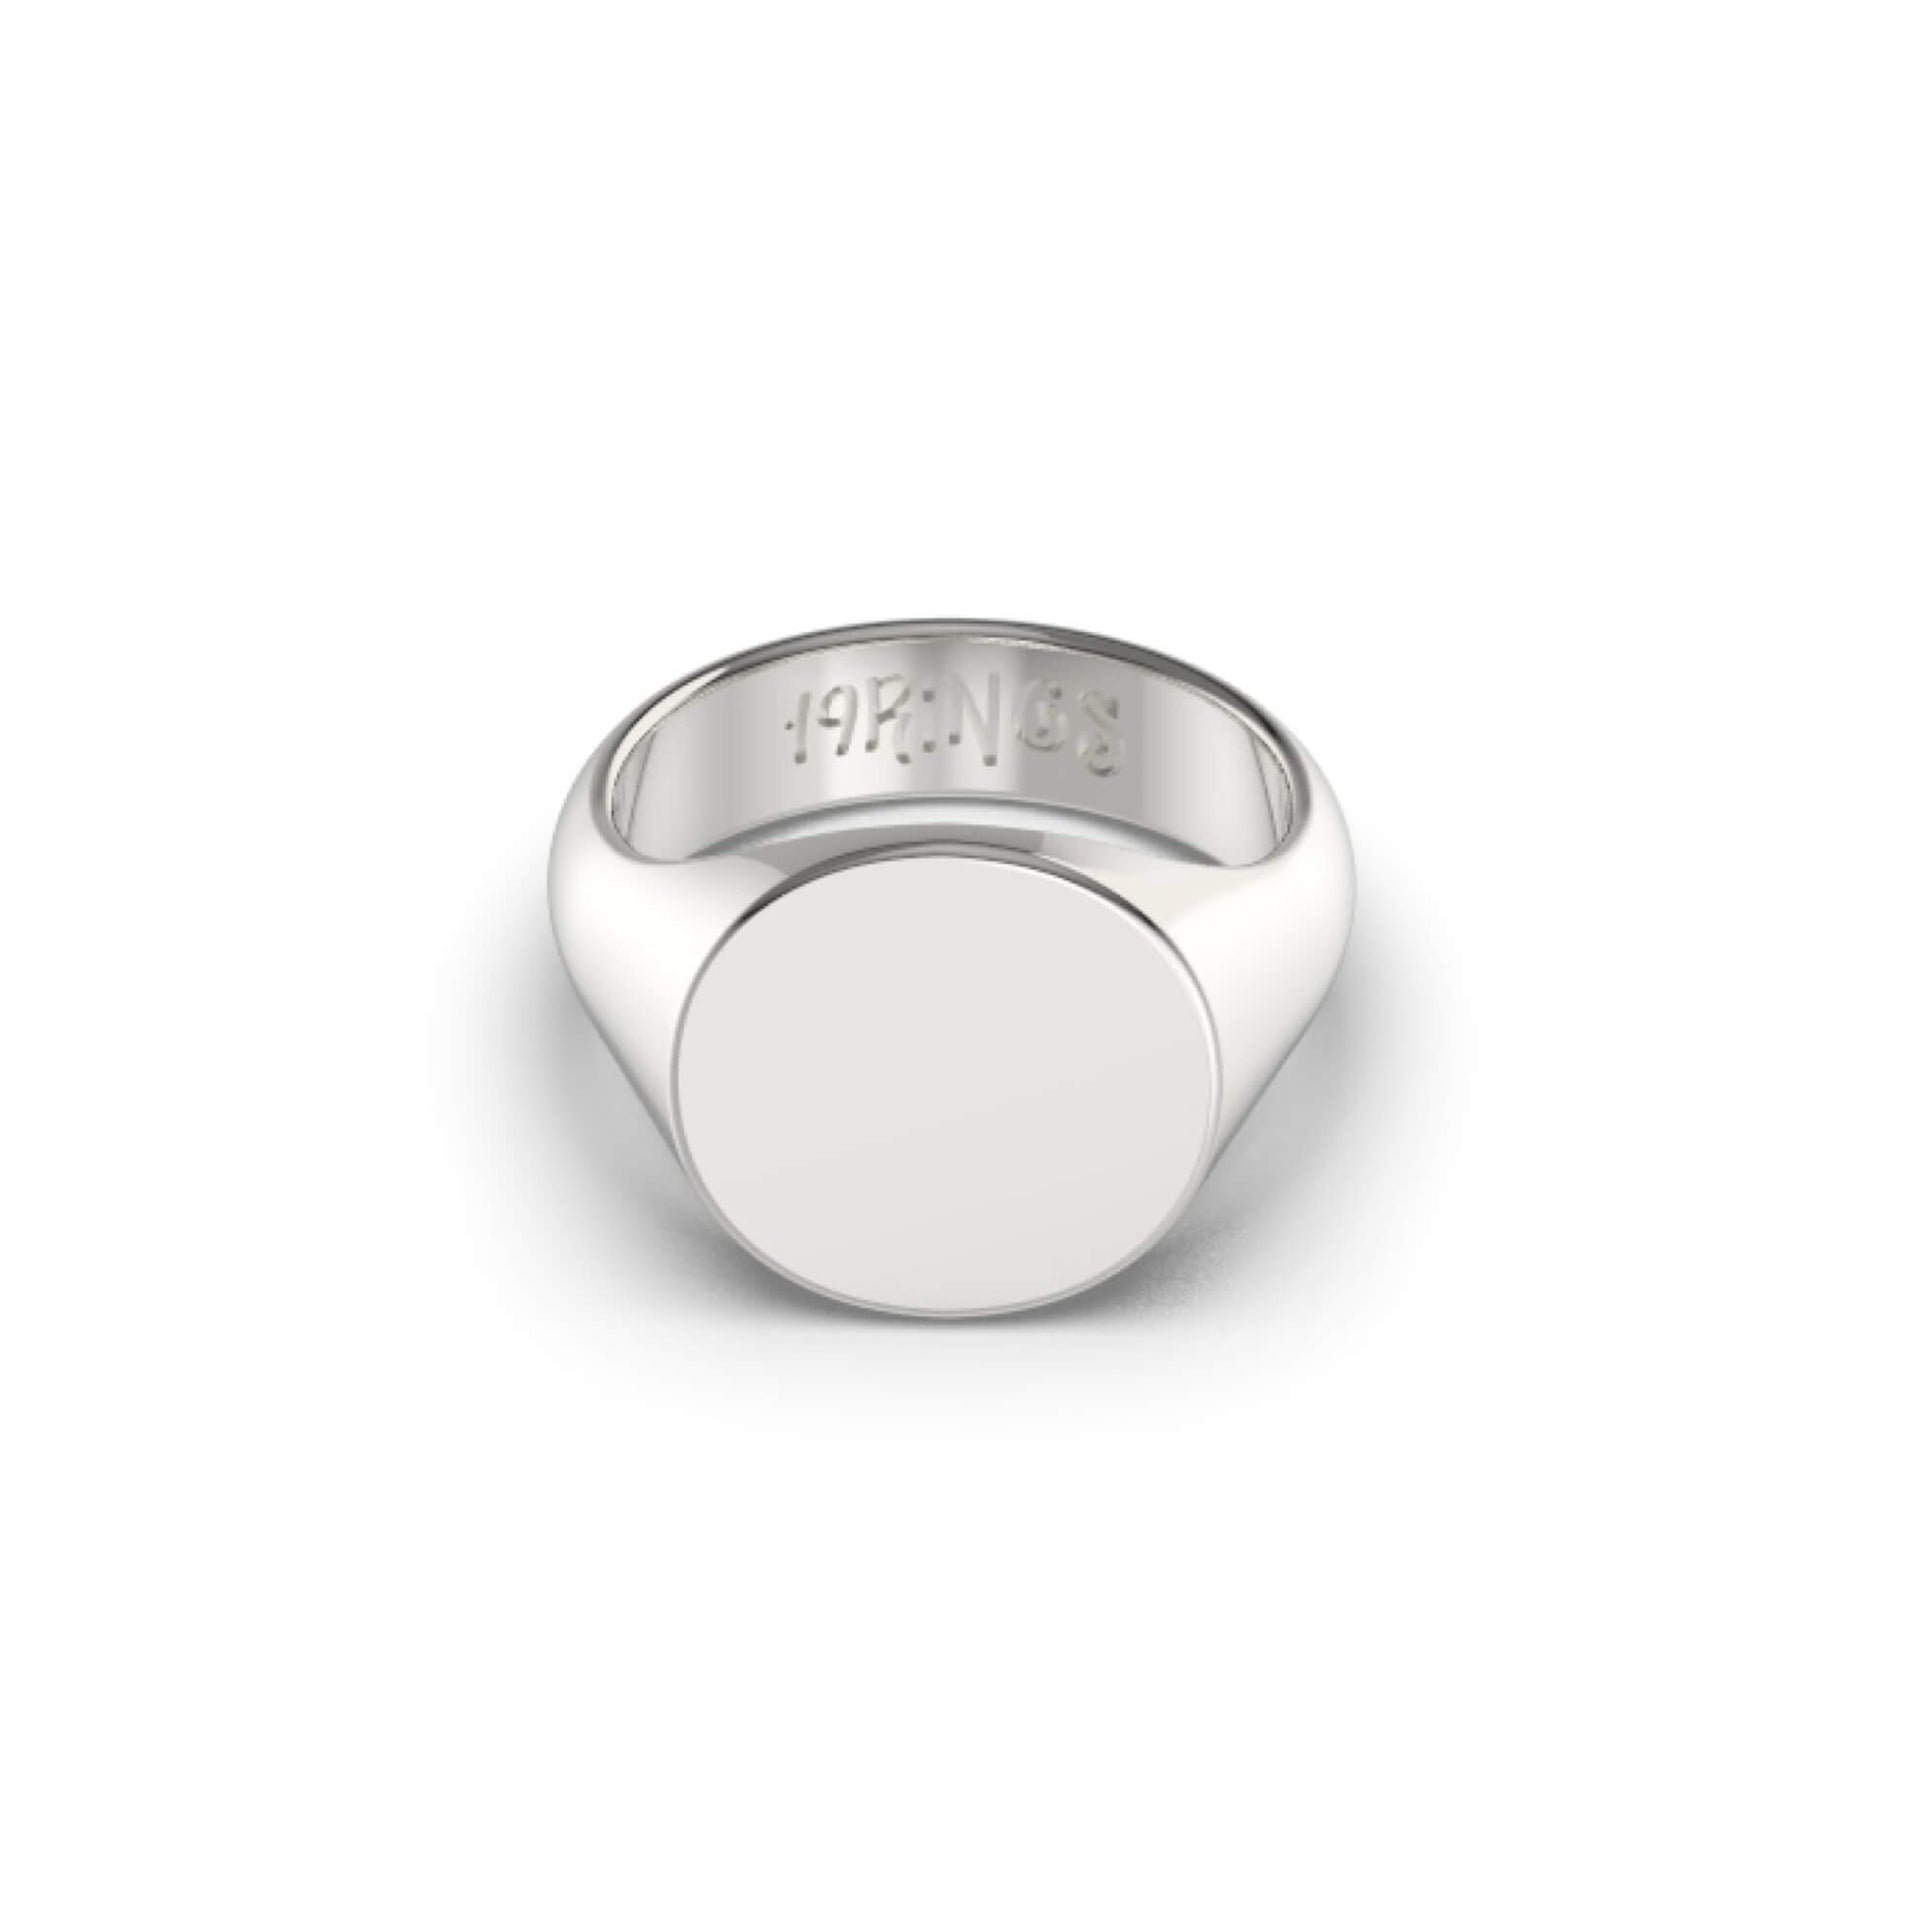 LIFE RING - OVAL SIGNET